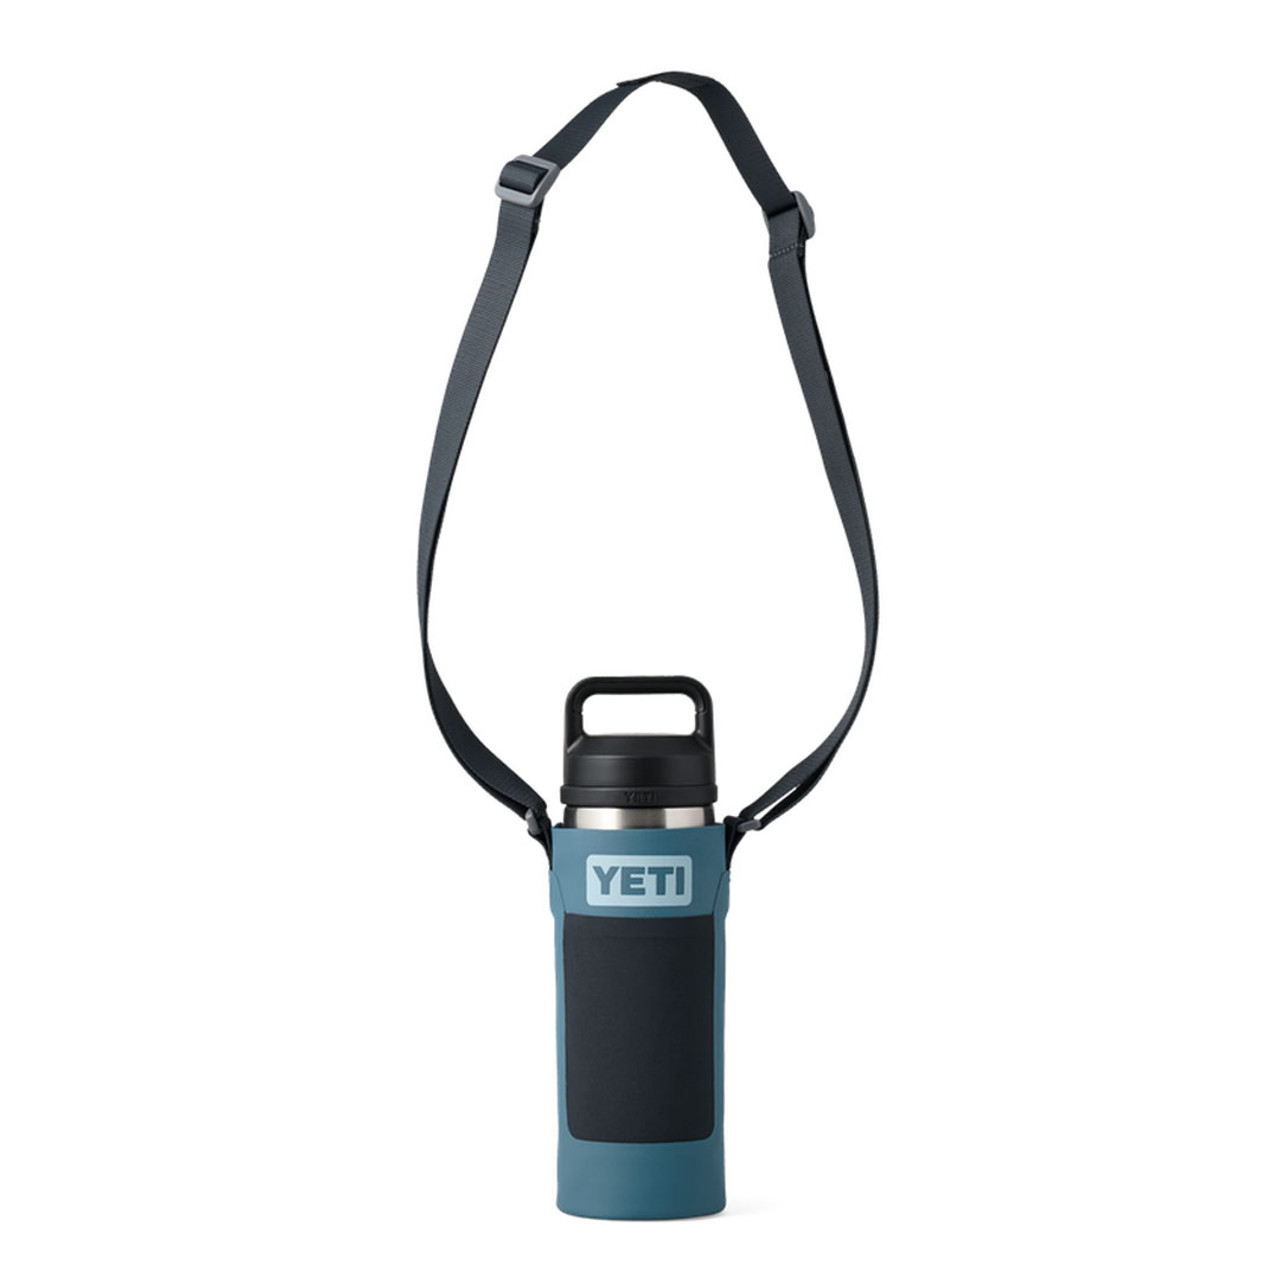 https://cdn11.bigcommerce.com/s-ppsyskcavg/images/stencil/1280x1280/products/59447/197086/W-site_studio_Small_Bottle_Sling_Nordic_Blue_Front_Bottle_1898_Primary_B_2400x2400__48393.1657564372.jpg?c=2?imbypass=on